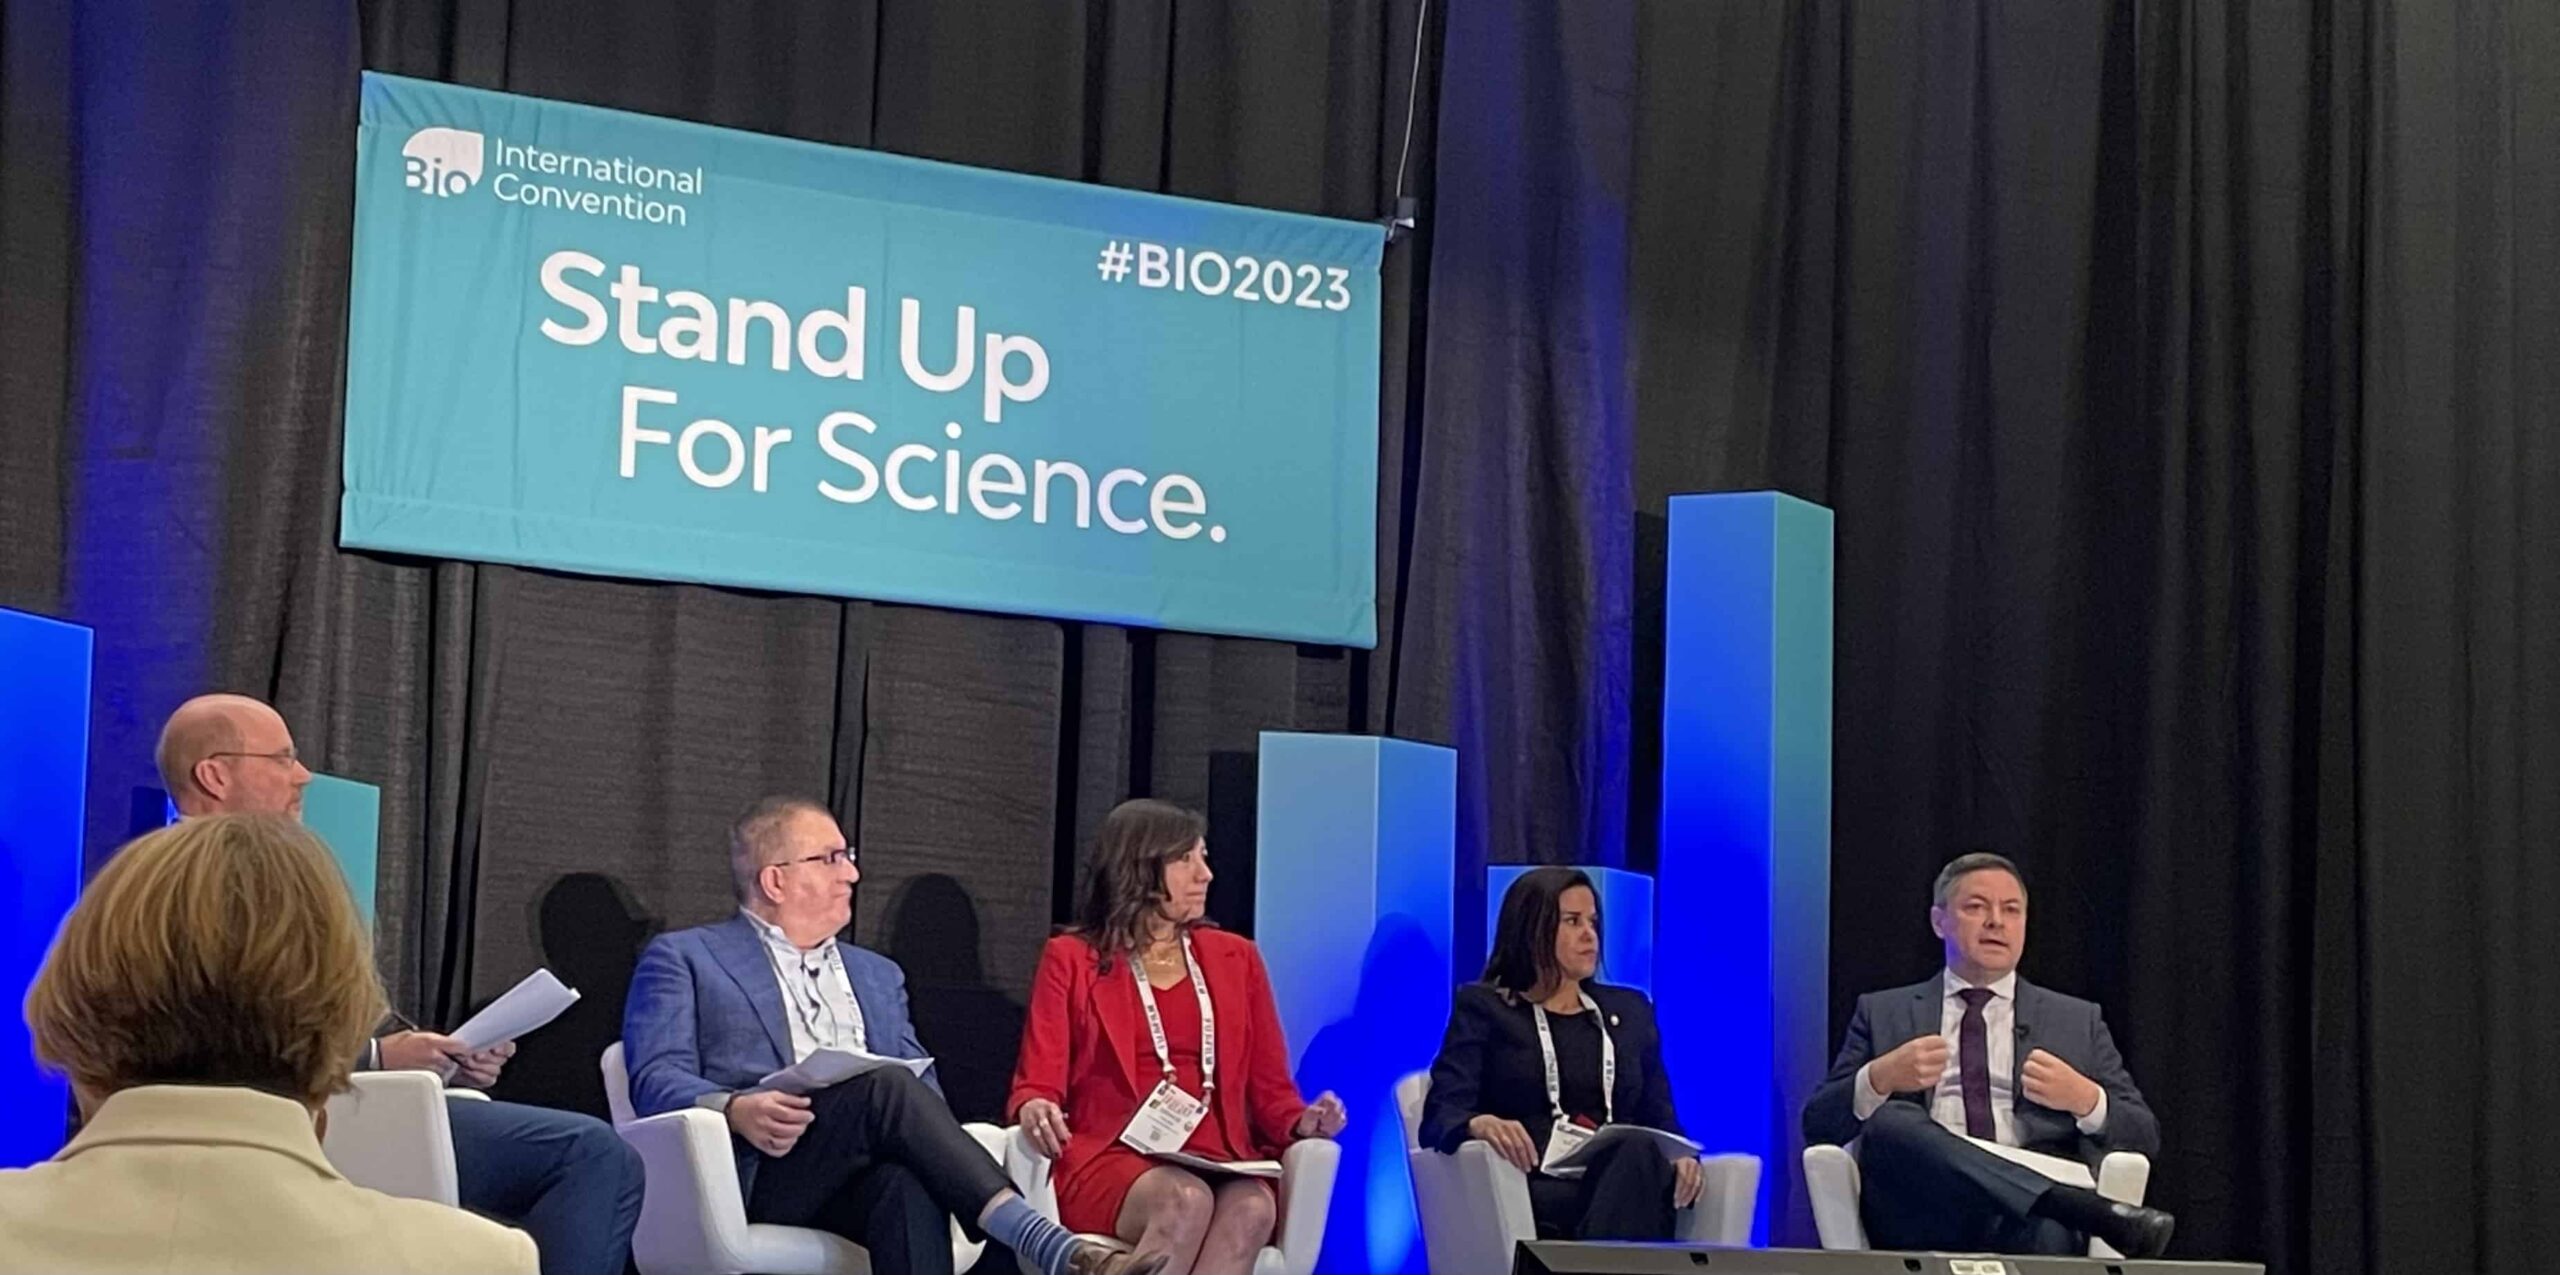 9 Takeaways for Biotech CEOs from the Biotech Hangout at the BIO Conference in Boston (June 2023)